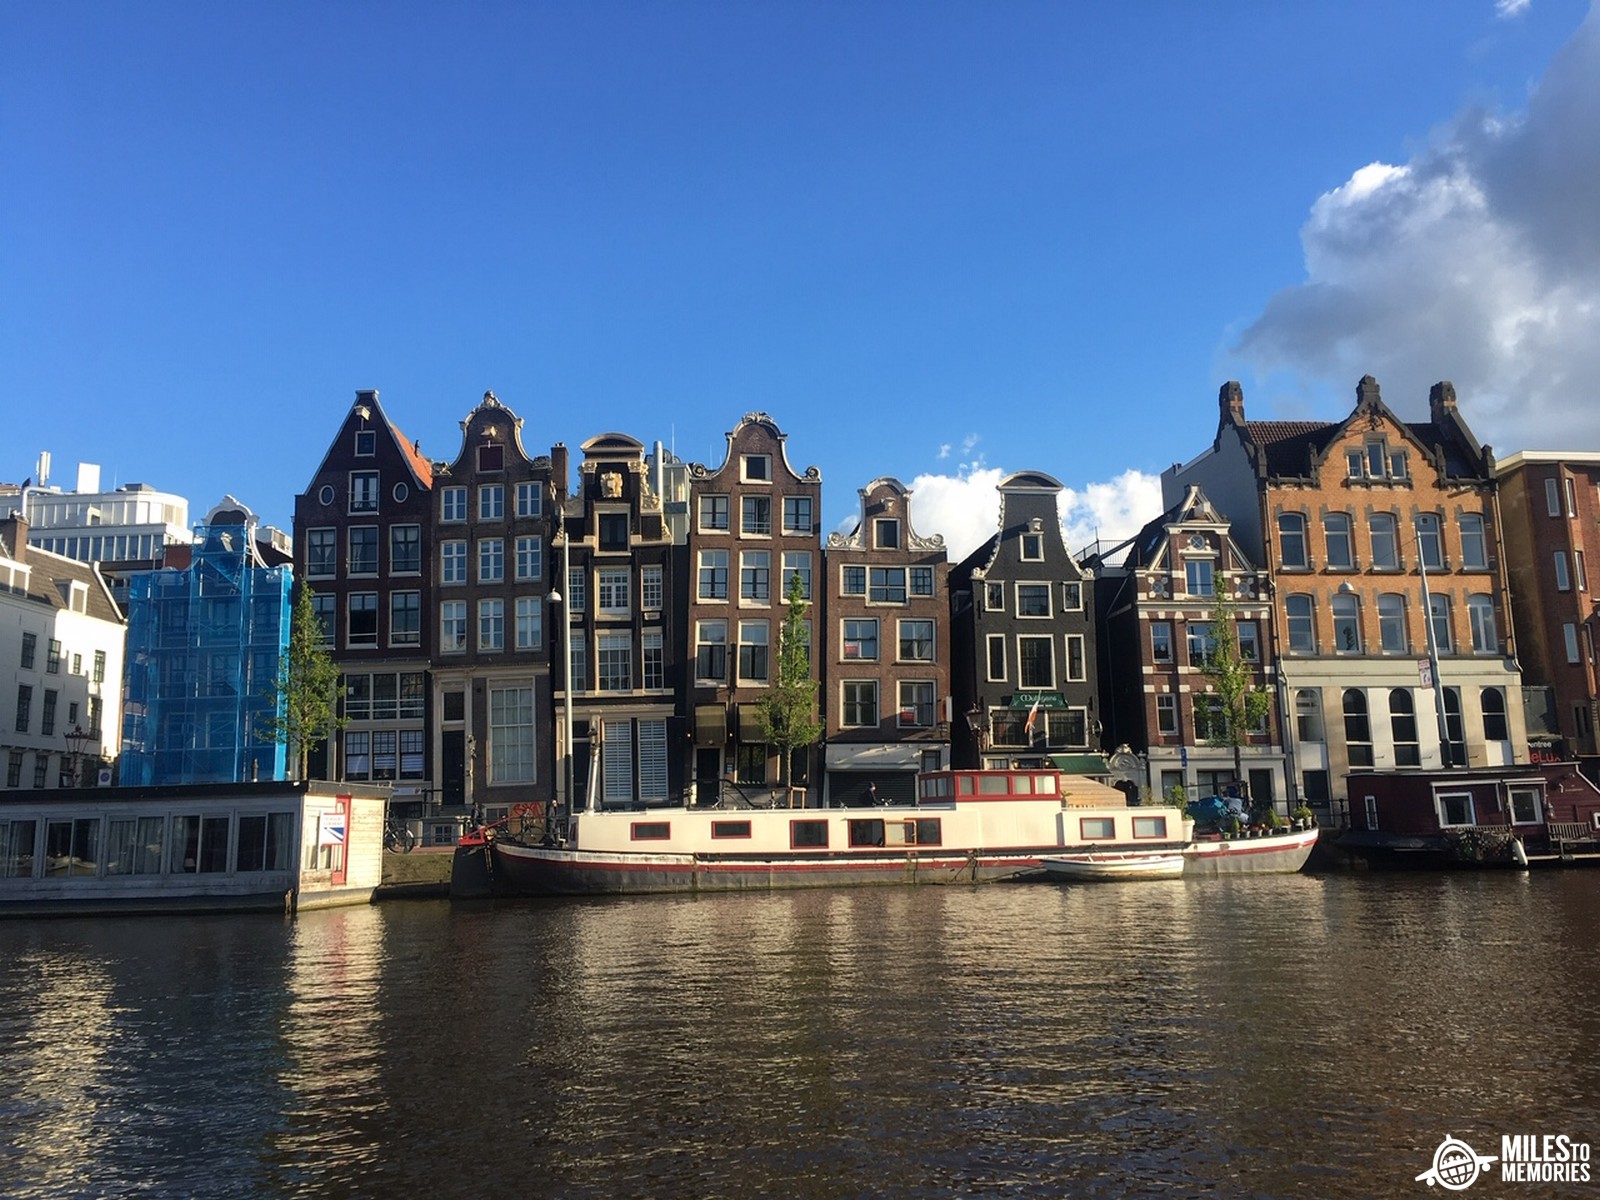 amsterdam canal tour review